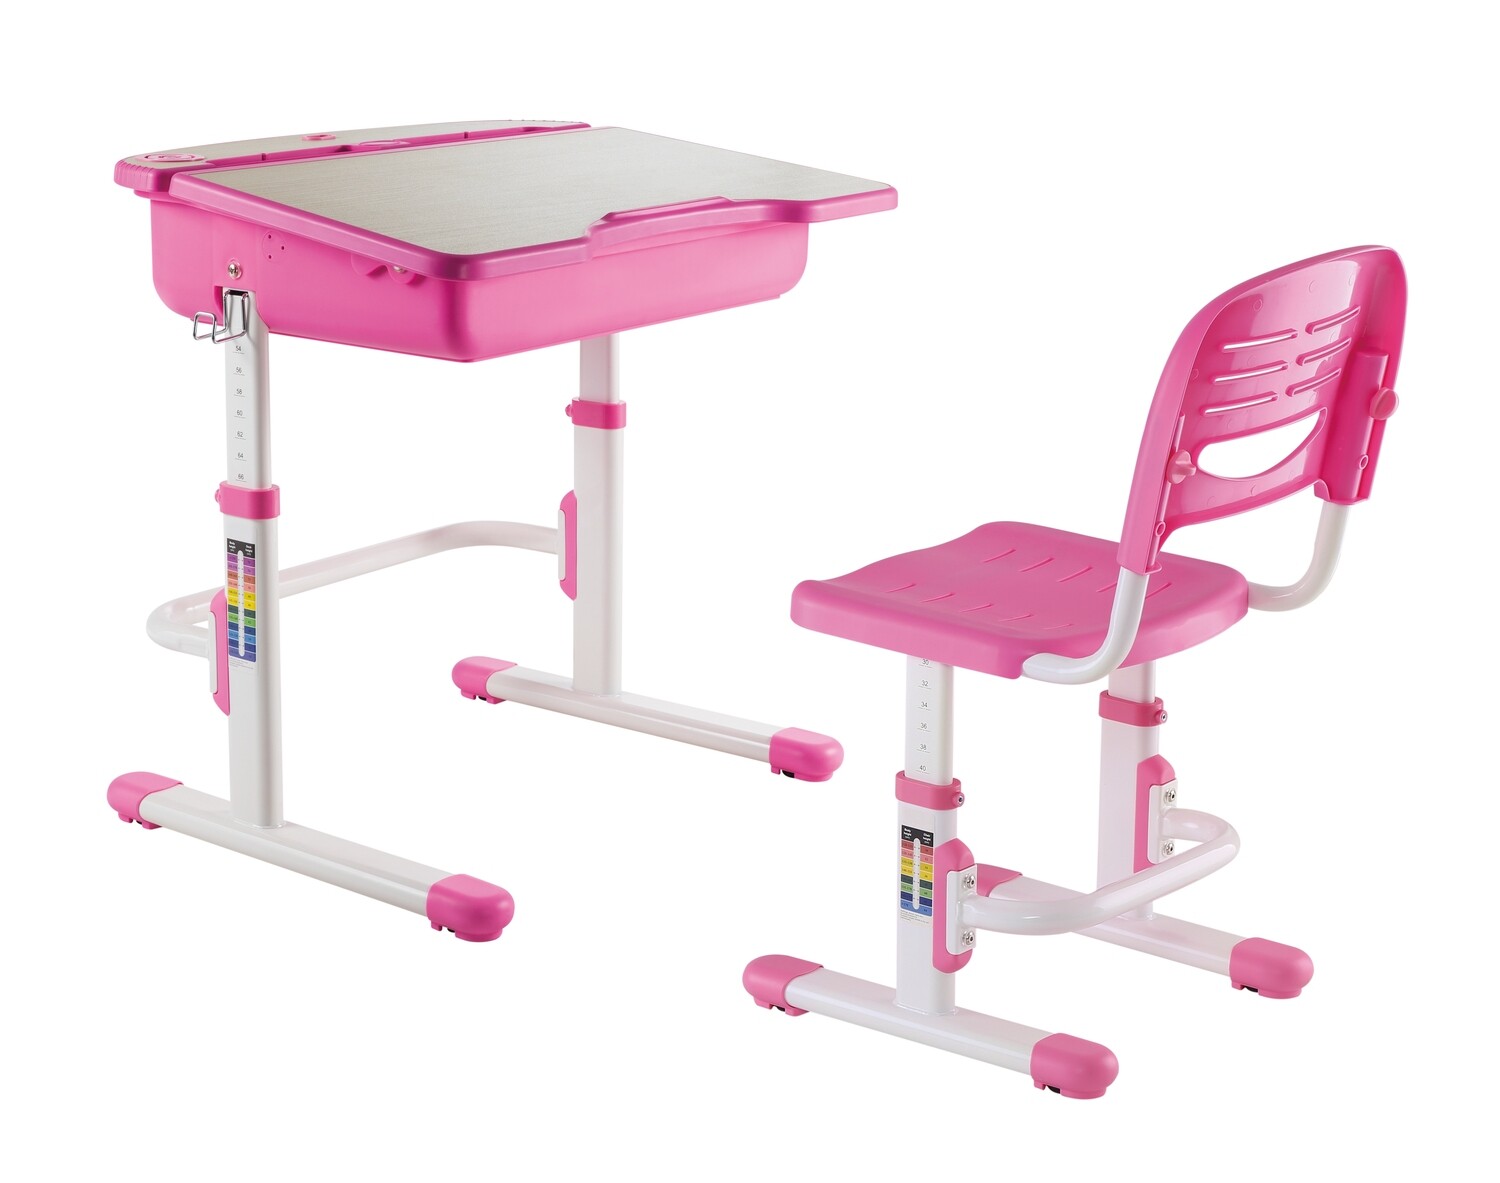 KIDOMATE SpaceDesk Study Table and Chair set Pink - Refurbished